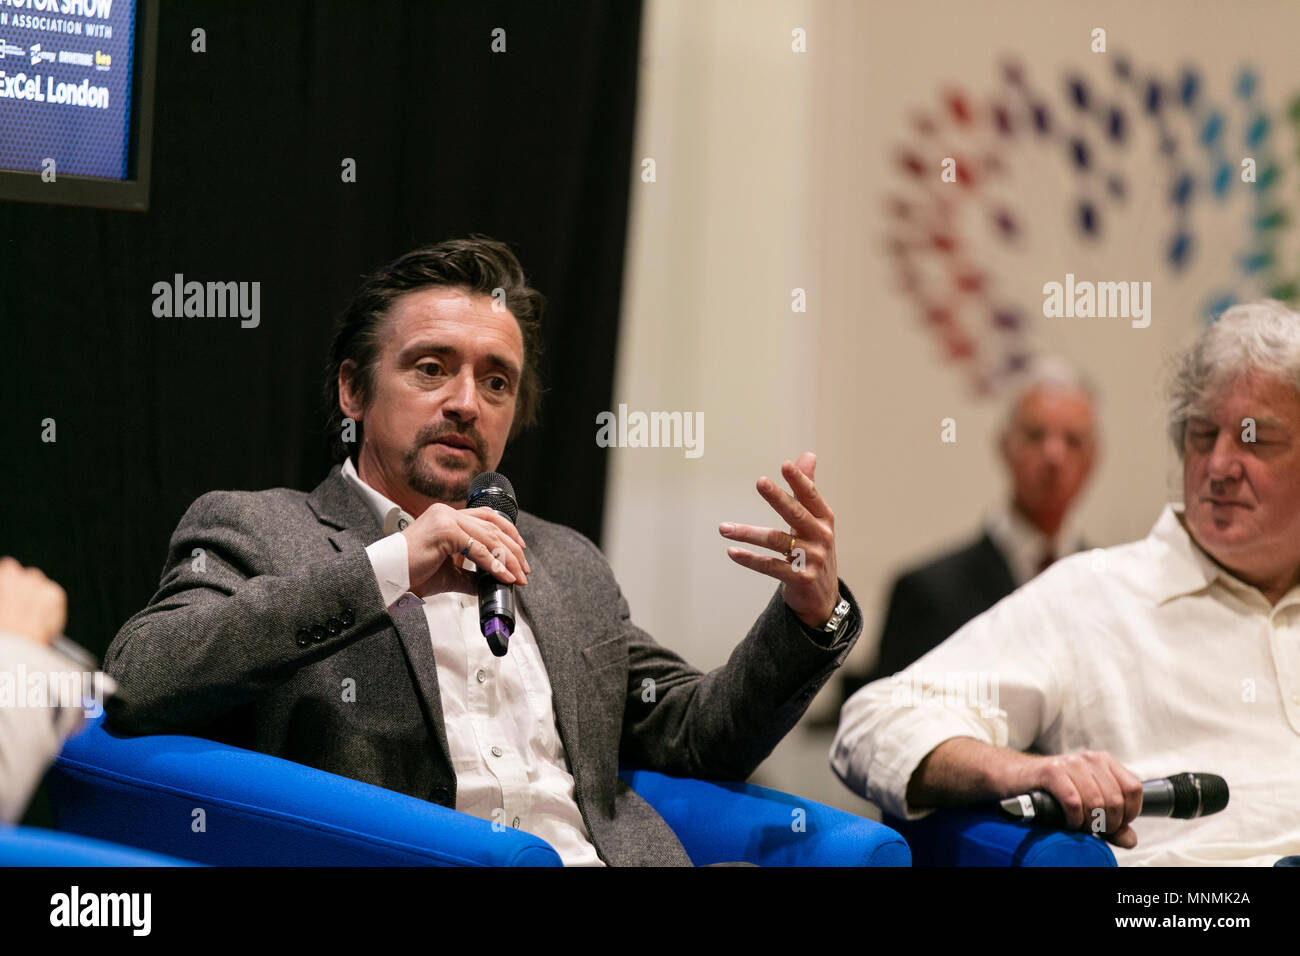 London, UK. 18th May 2018. Television presenters James May and Richard Hammond visit the Confused.com London motor show at the Excel convention centre Credit: Ink Drop/Alamy Live News Stock Photo